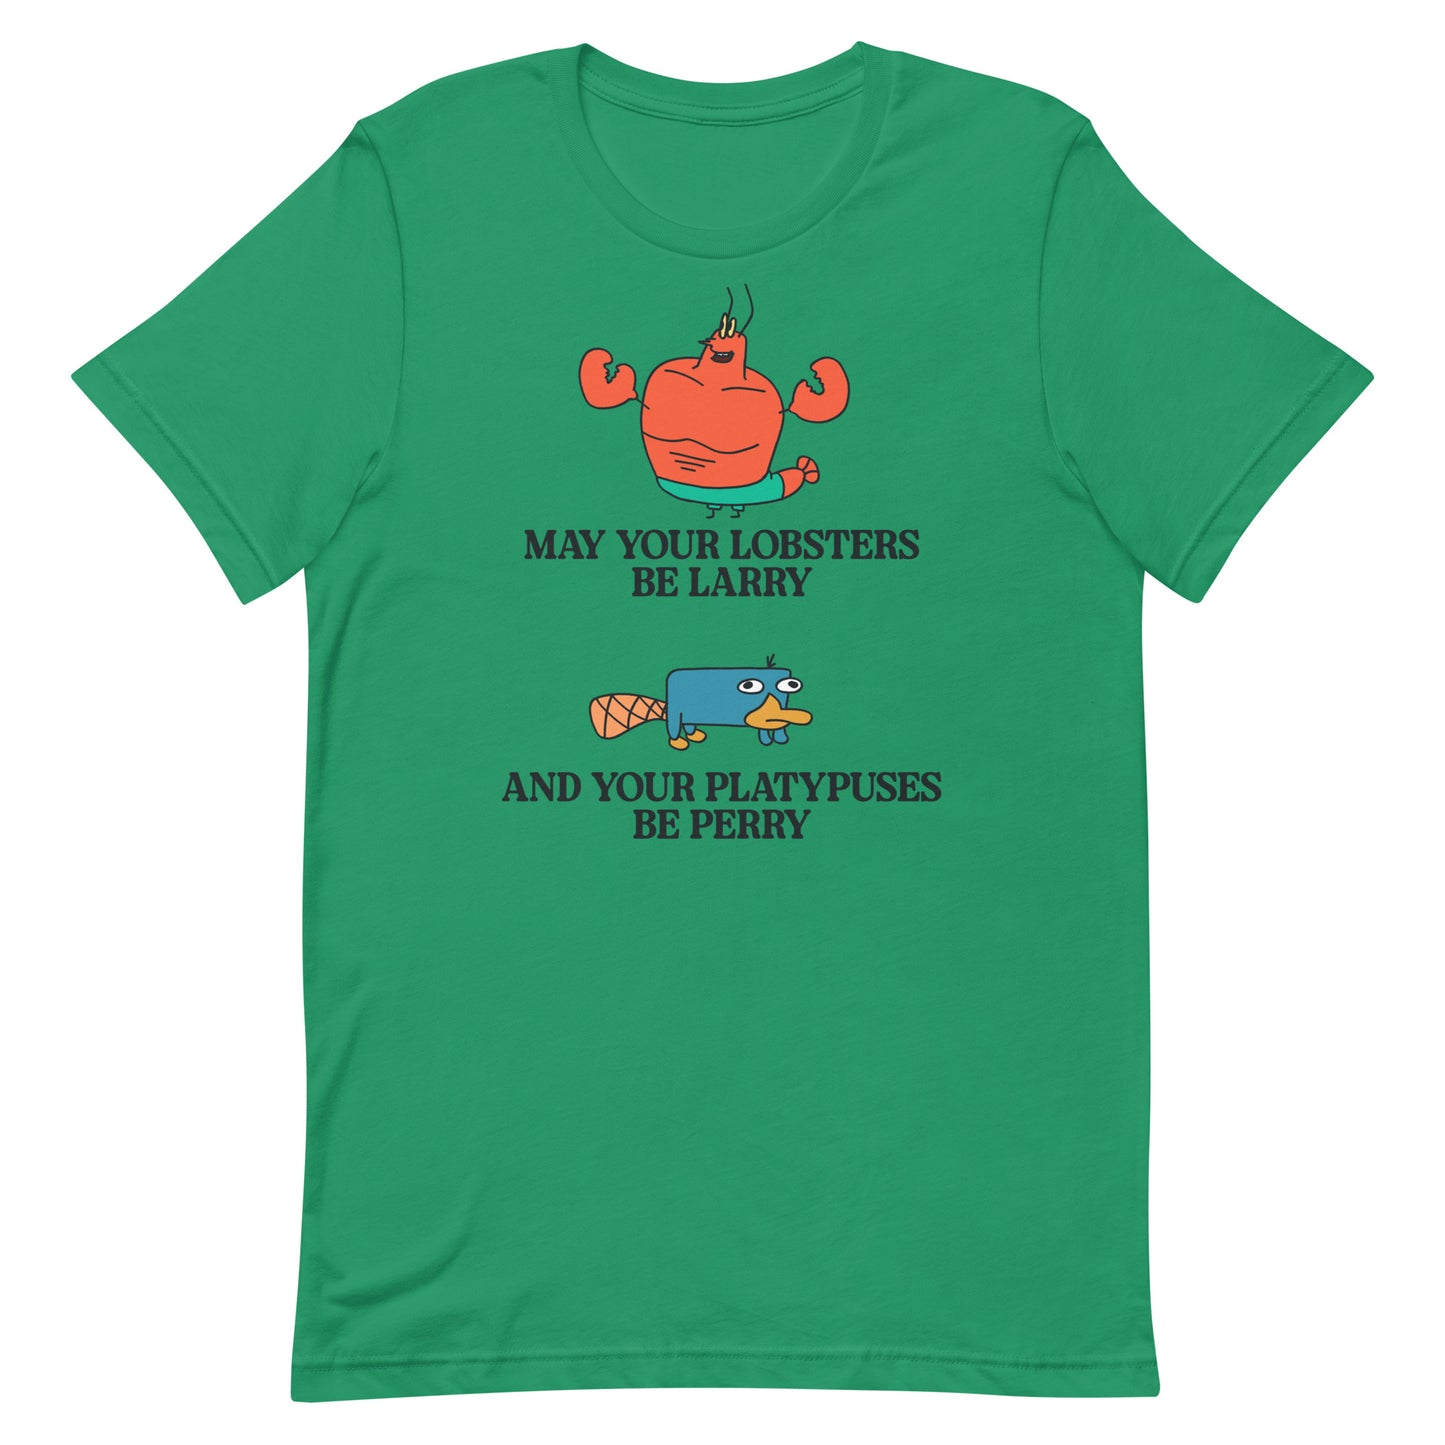 Lobsters Be Larry Platypuses Be Perry Unisex t-shirt